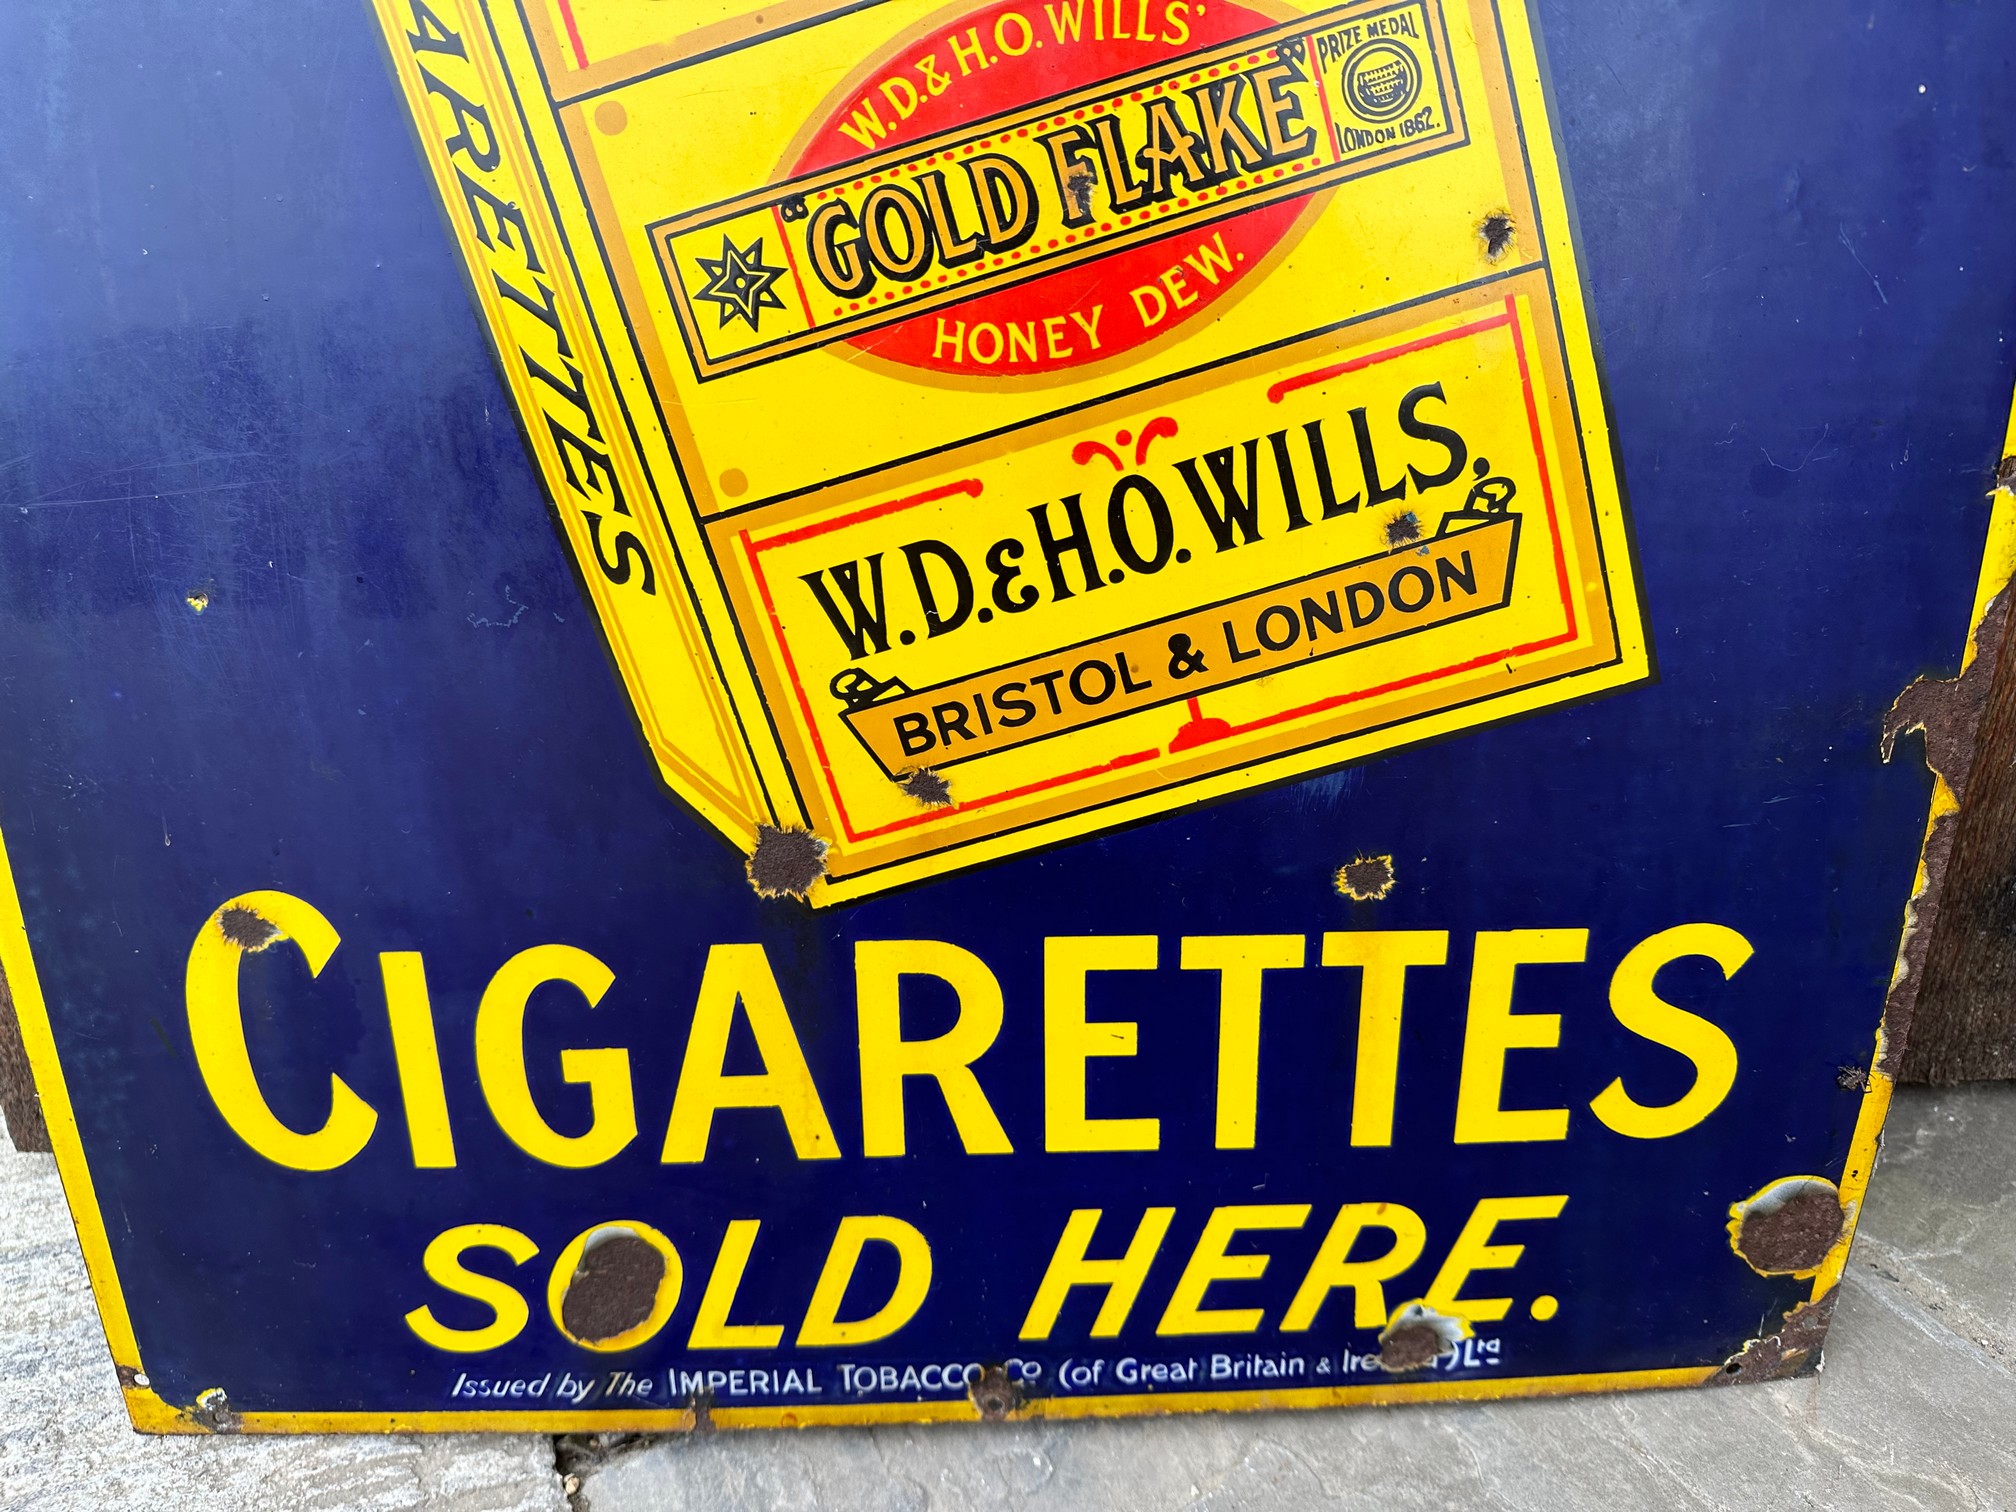 A Wills's Gold Flake Cigarettes Sold Here pictorial 'packet' enamel advertising sign, issued by - Image 6 of 6